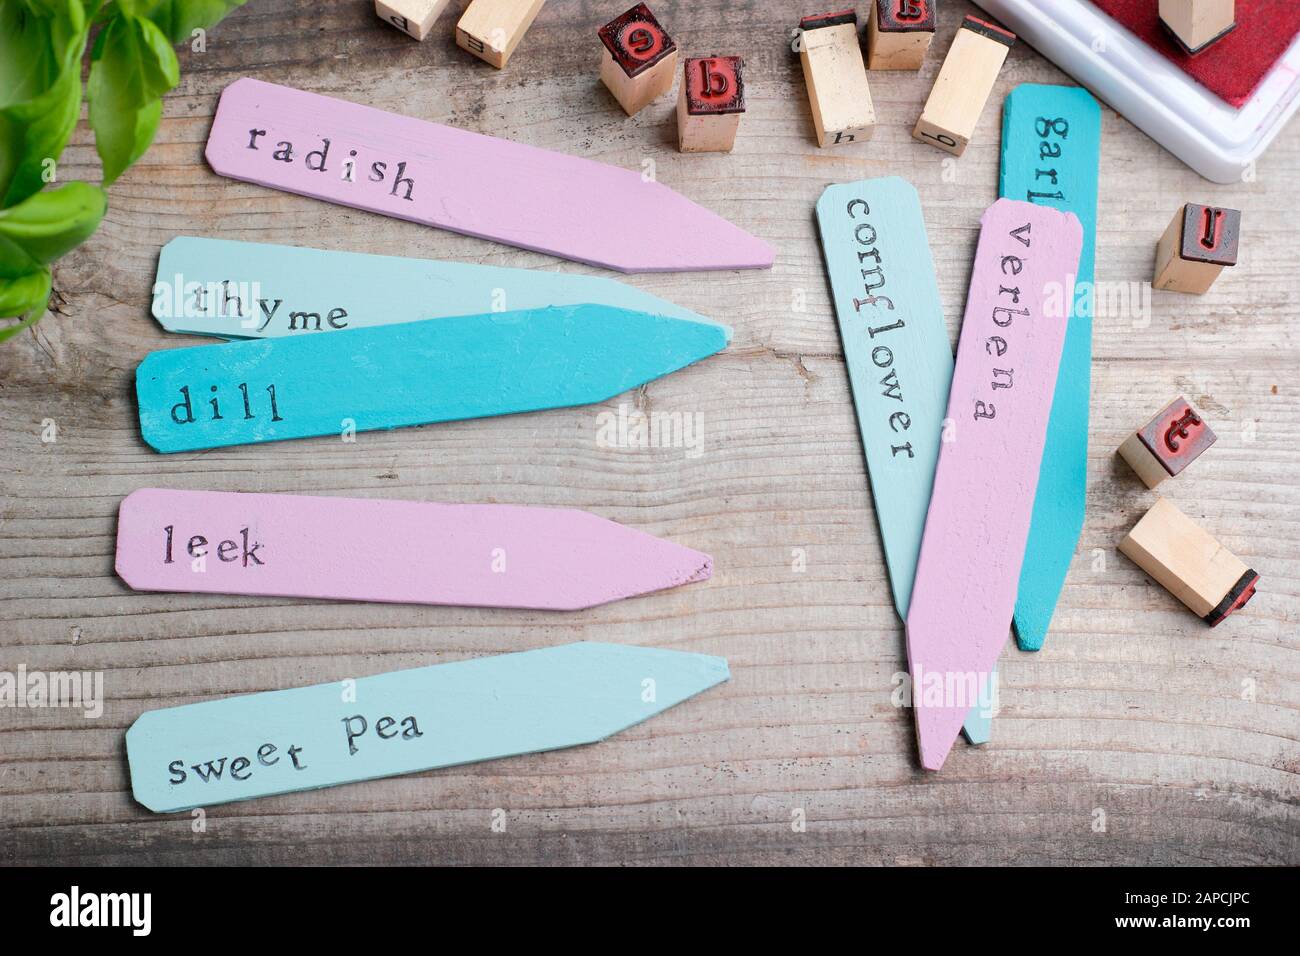 Recycling wooden plant labels using paints and an inexpensive letter stamp Stock Photo